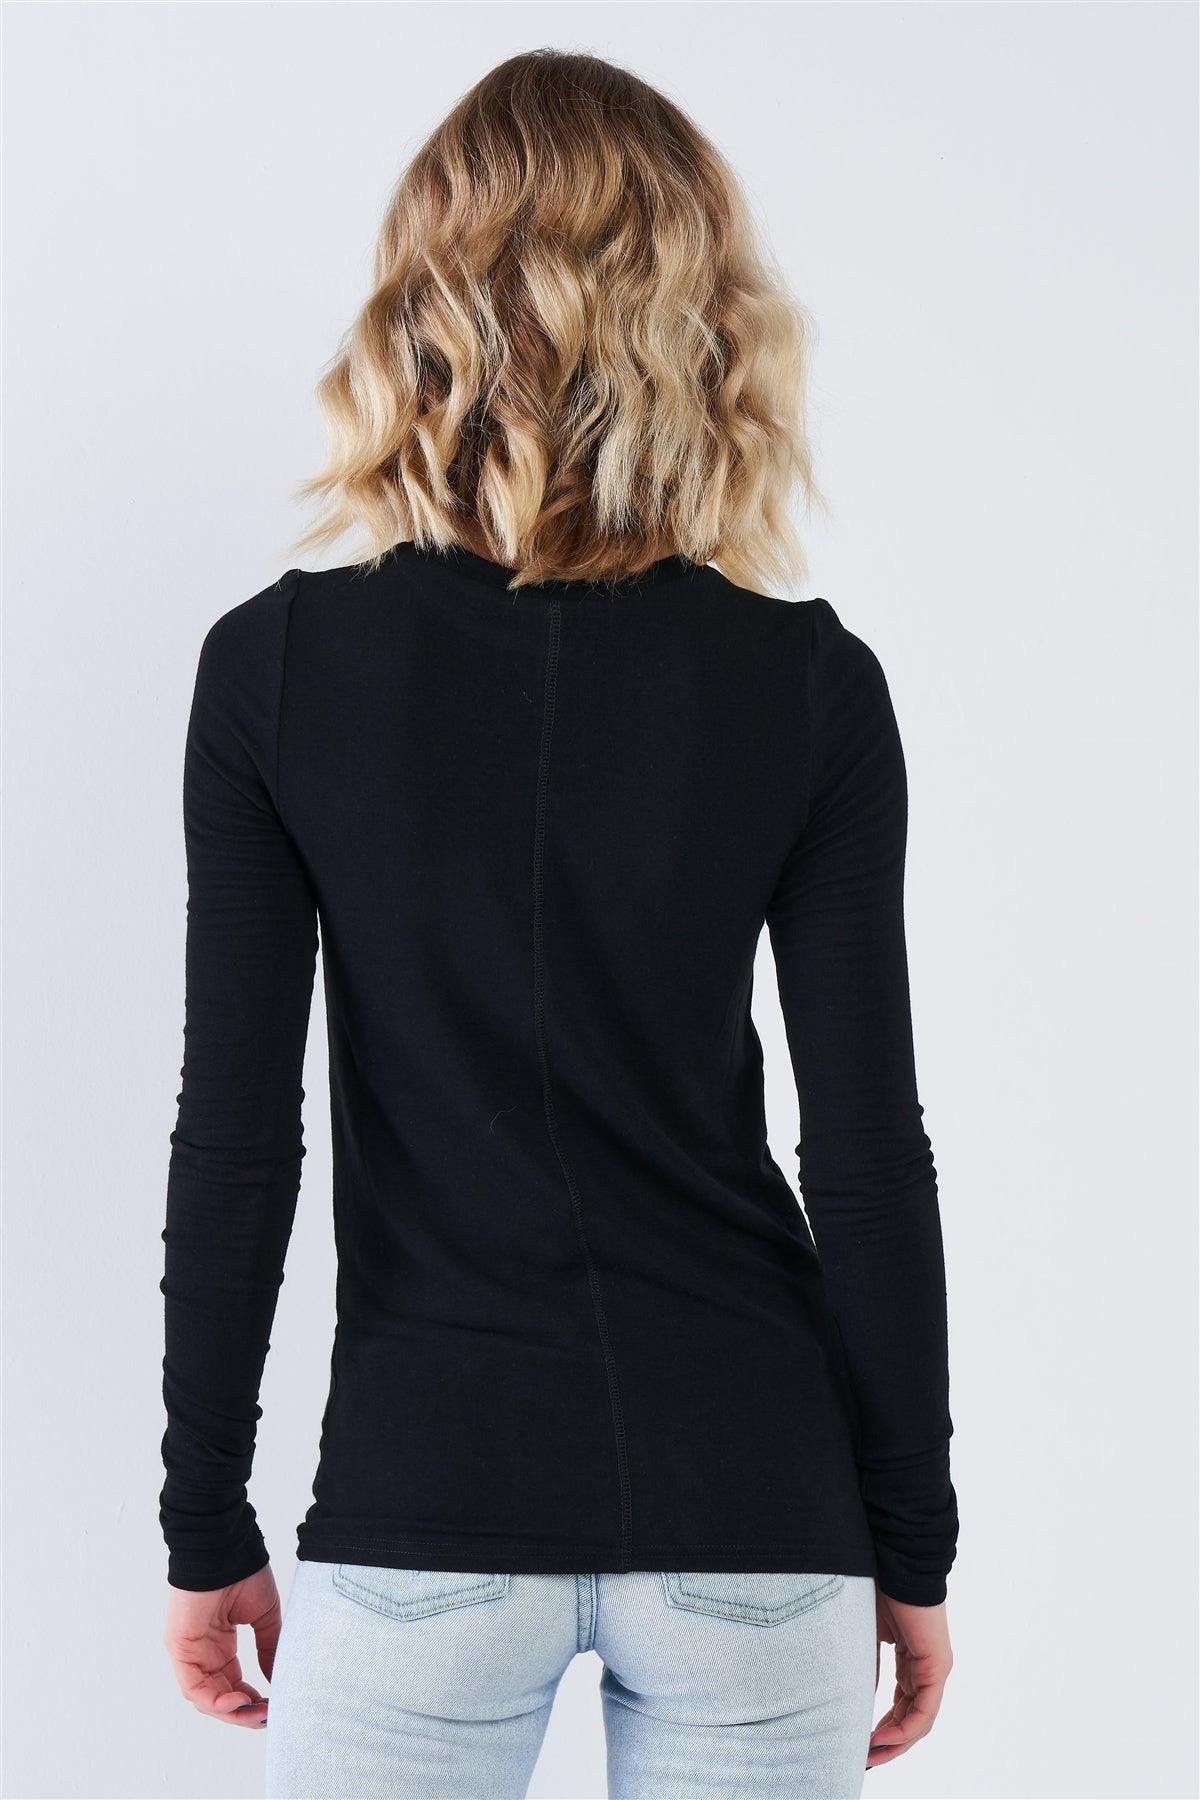 Black Casual Basic Long Sleeve Stretchy Bodycon Top